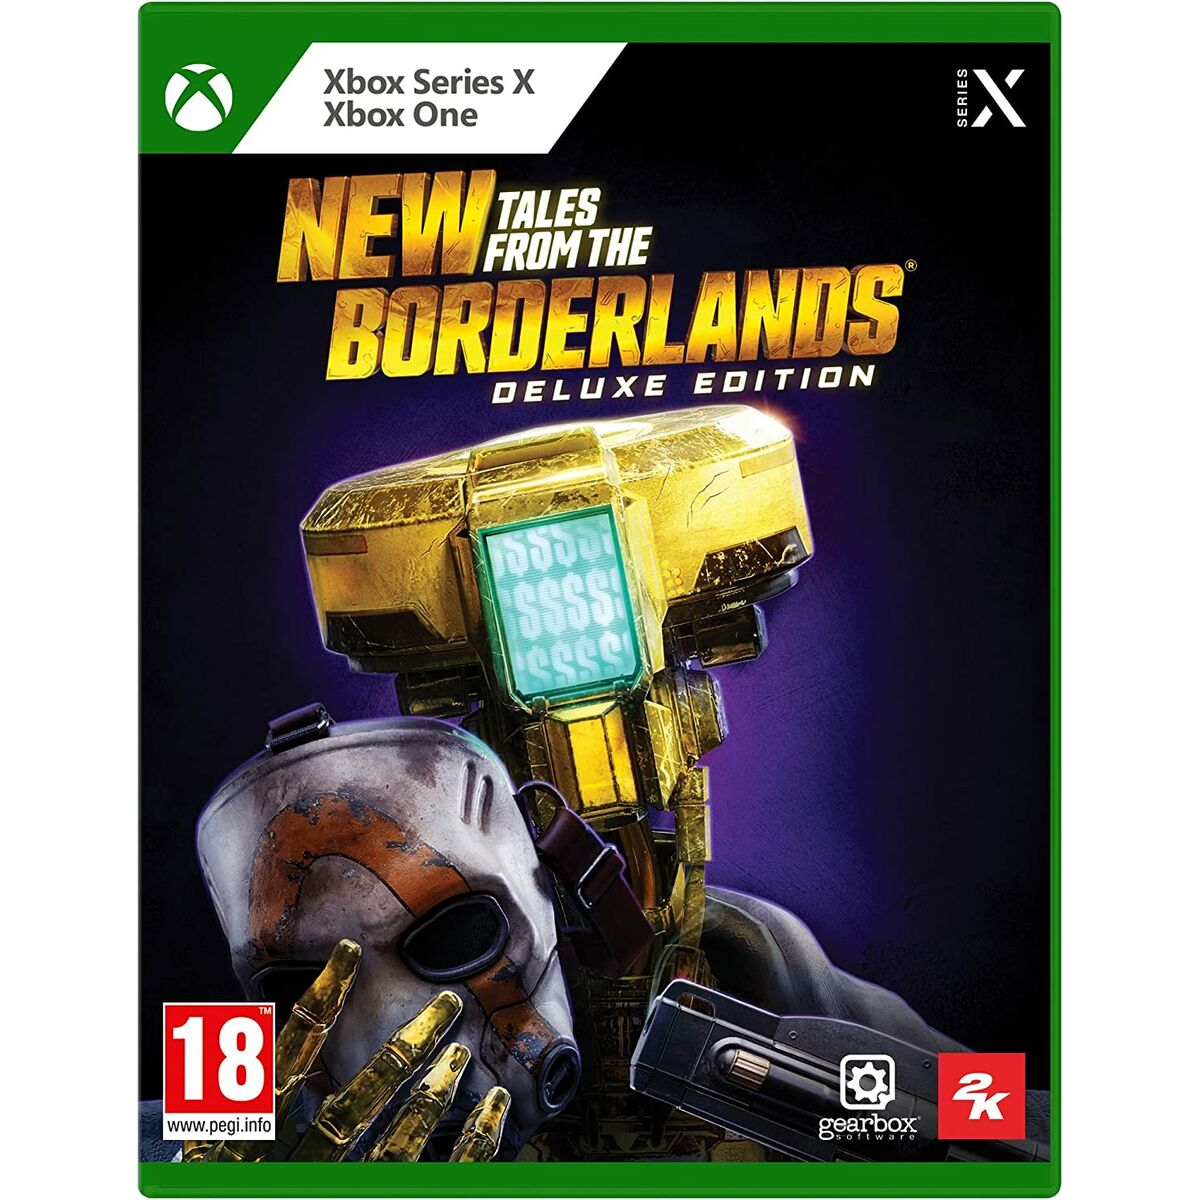 Jeu vidéo Xbox One 2K GAMES New Tales from the Borderlands Deluxe Edition